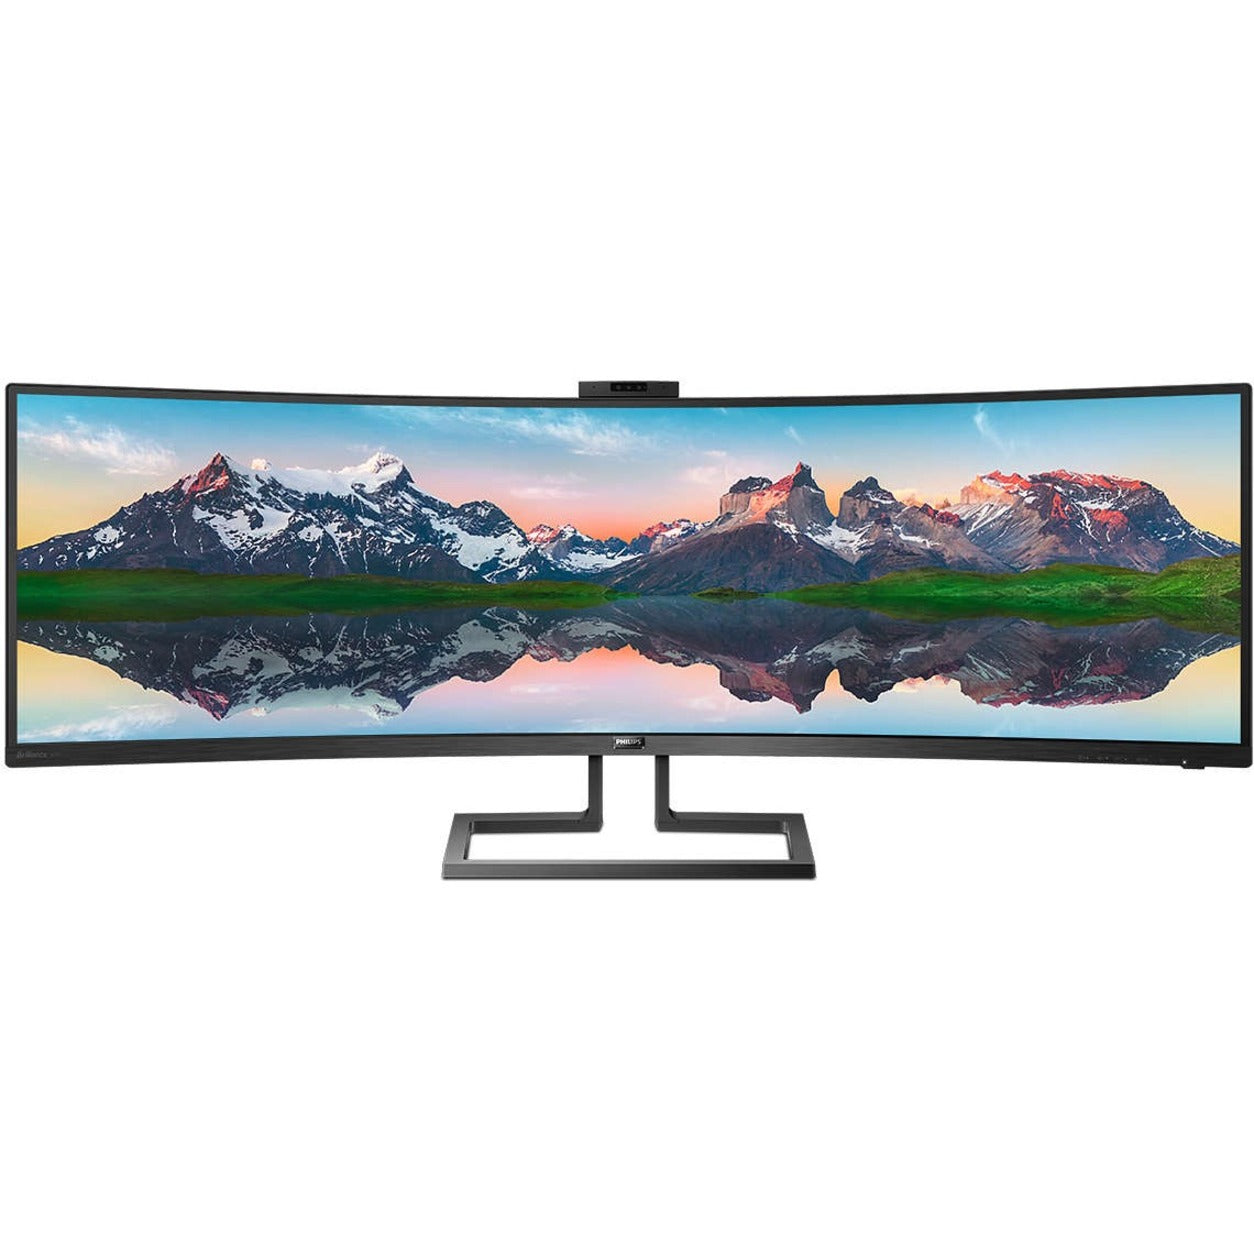 Philips Brilliance 499P9H 48.8" Webcam Dual Quad HD (DQHD) Curved Screen LCD Monitor - 32:9 - Textured Black